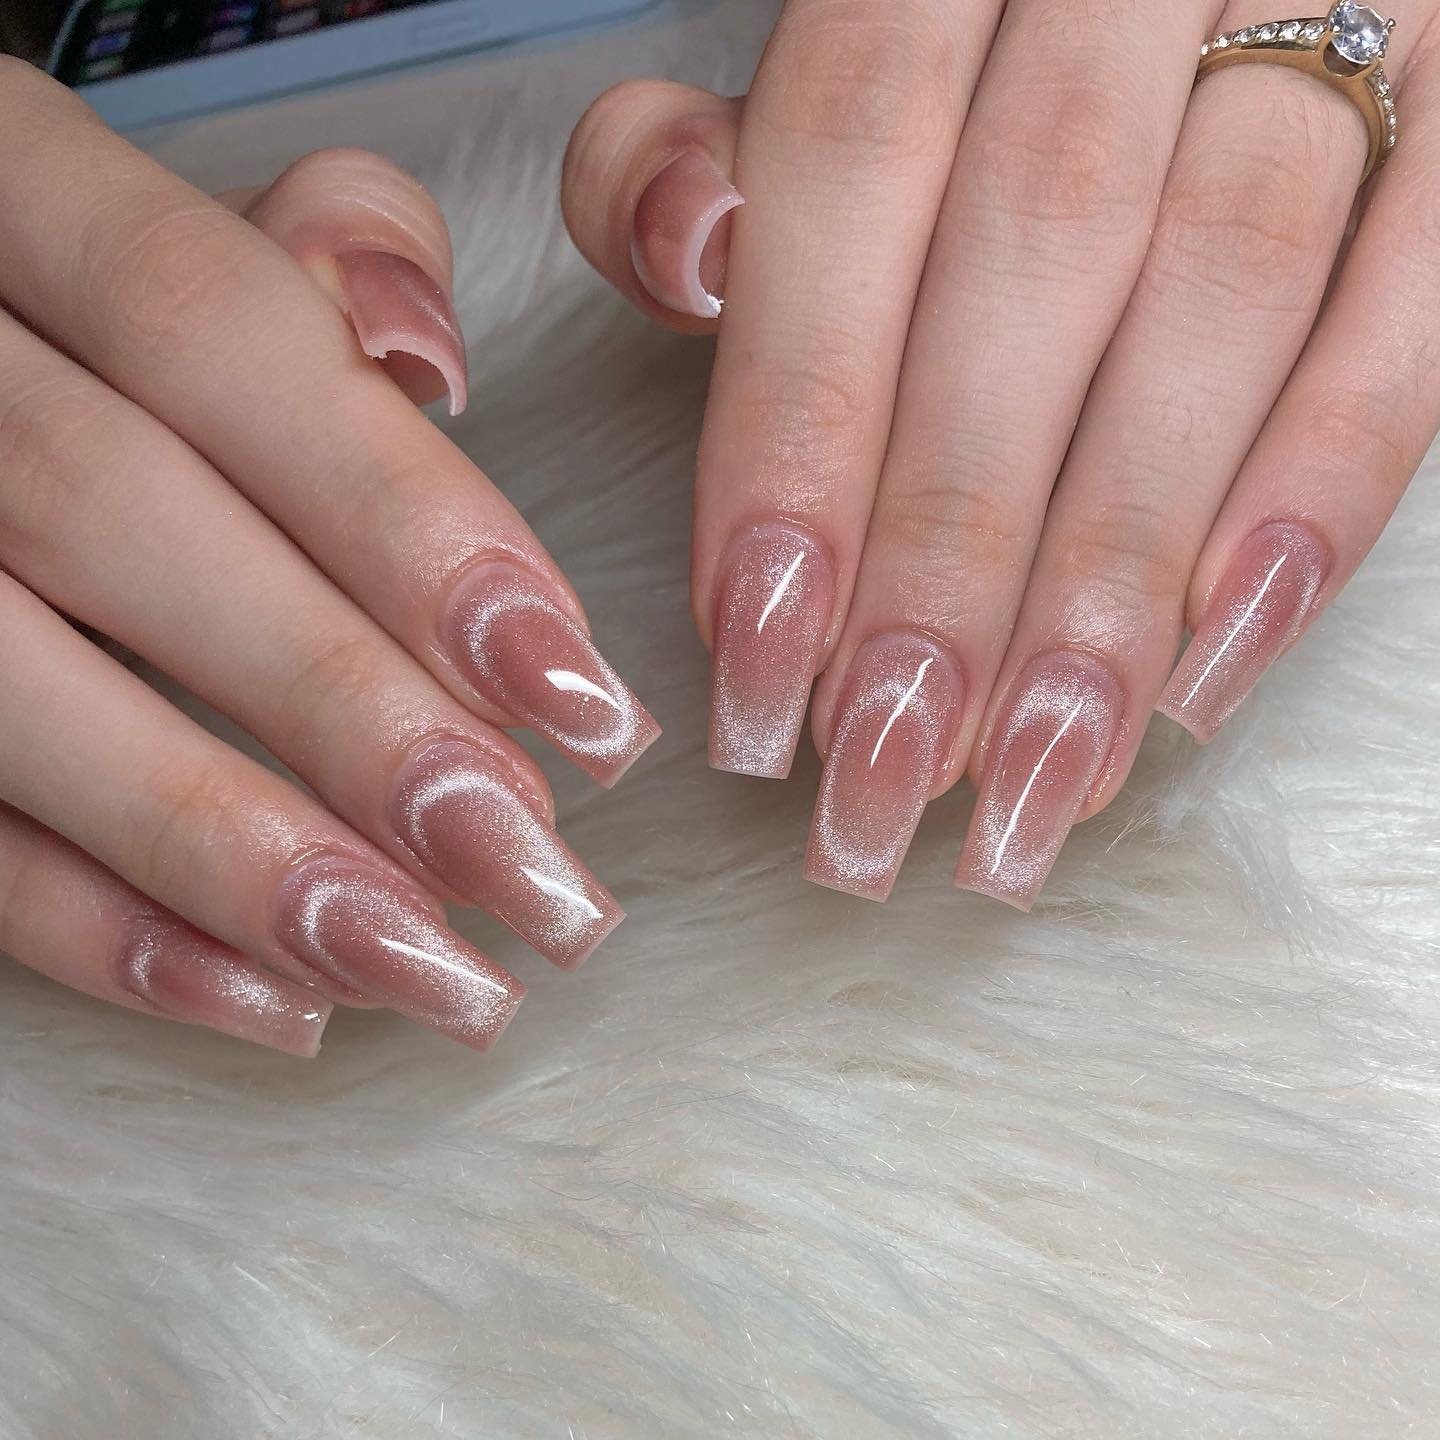 5 - Picture of Nude Baddie Nails